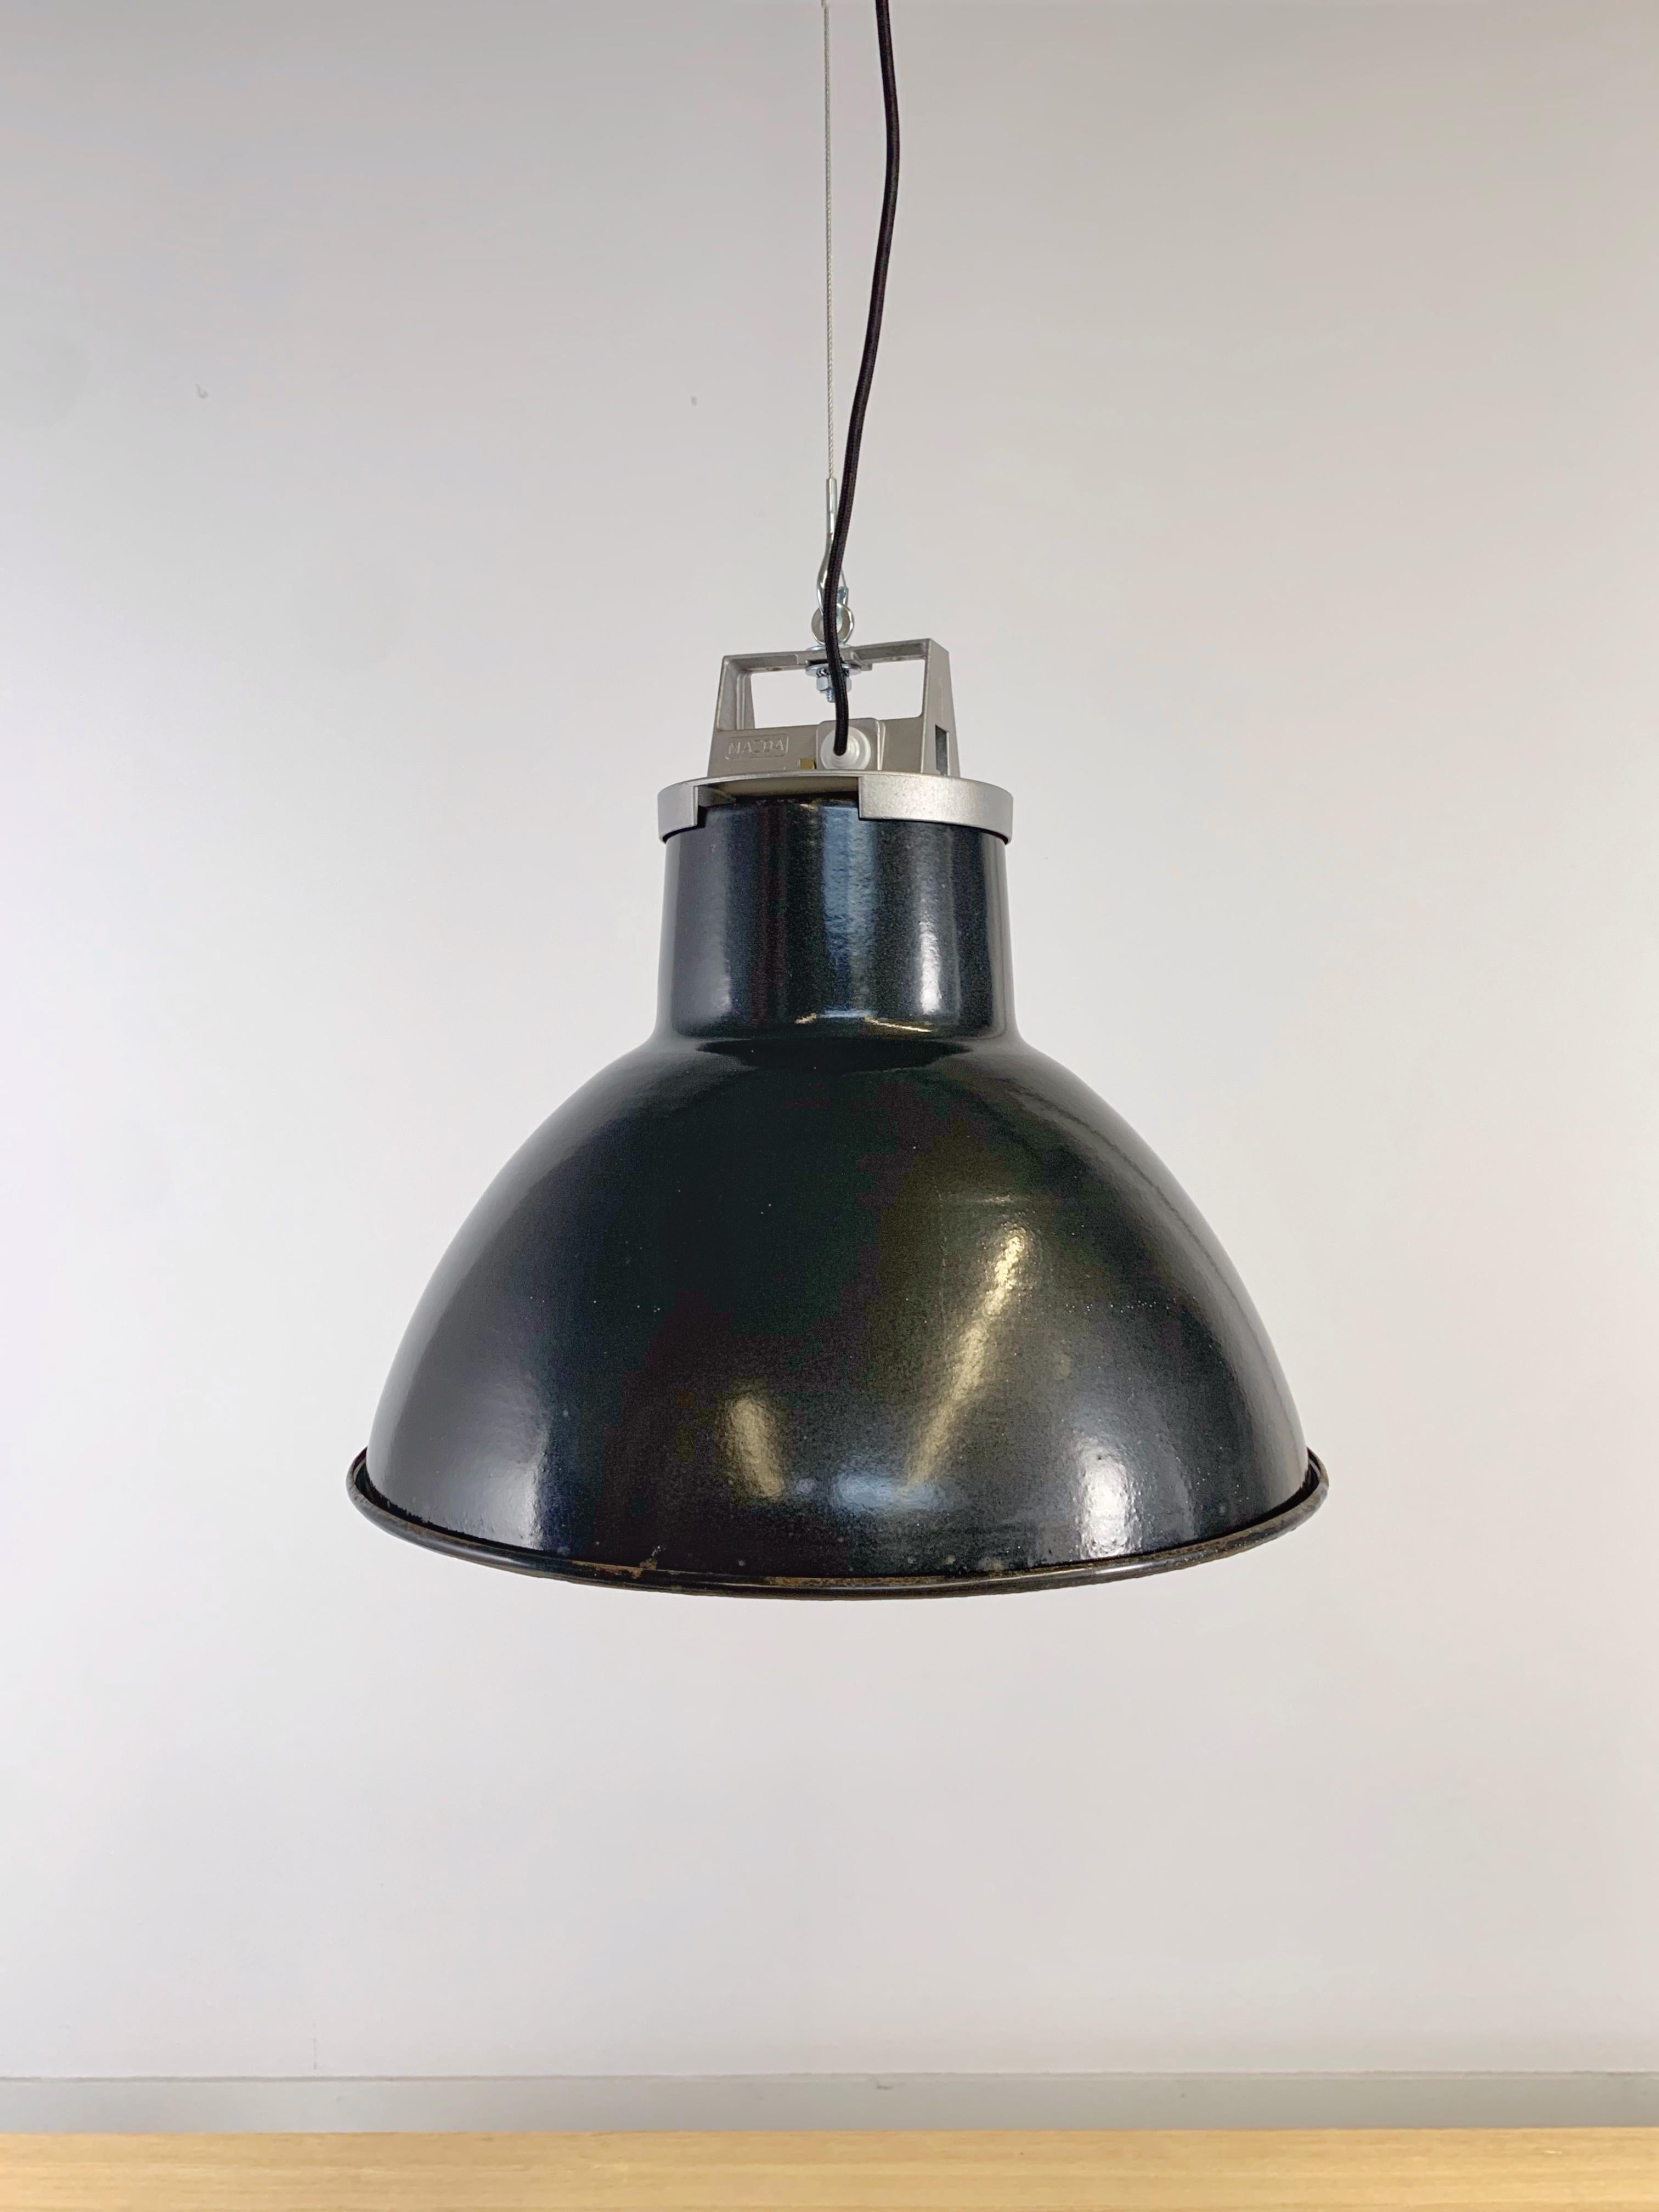 Original Mazda Industrial light pendant Mazda 
These beautiful industrial lamps come from the Renault factories in Lyon in France.

All lamps have been made suitable by international standards for incandescent light bulbs, energy-efficient and LED